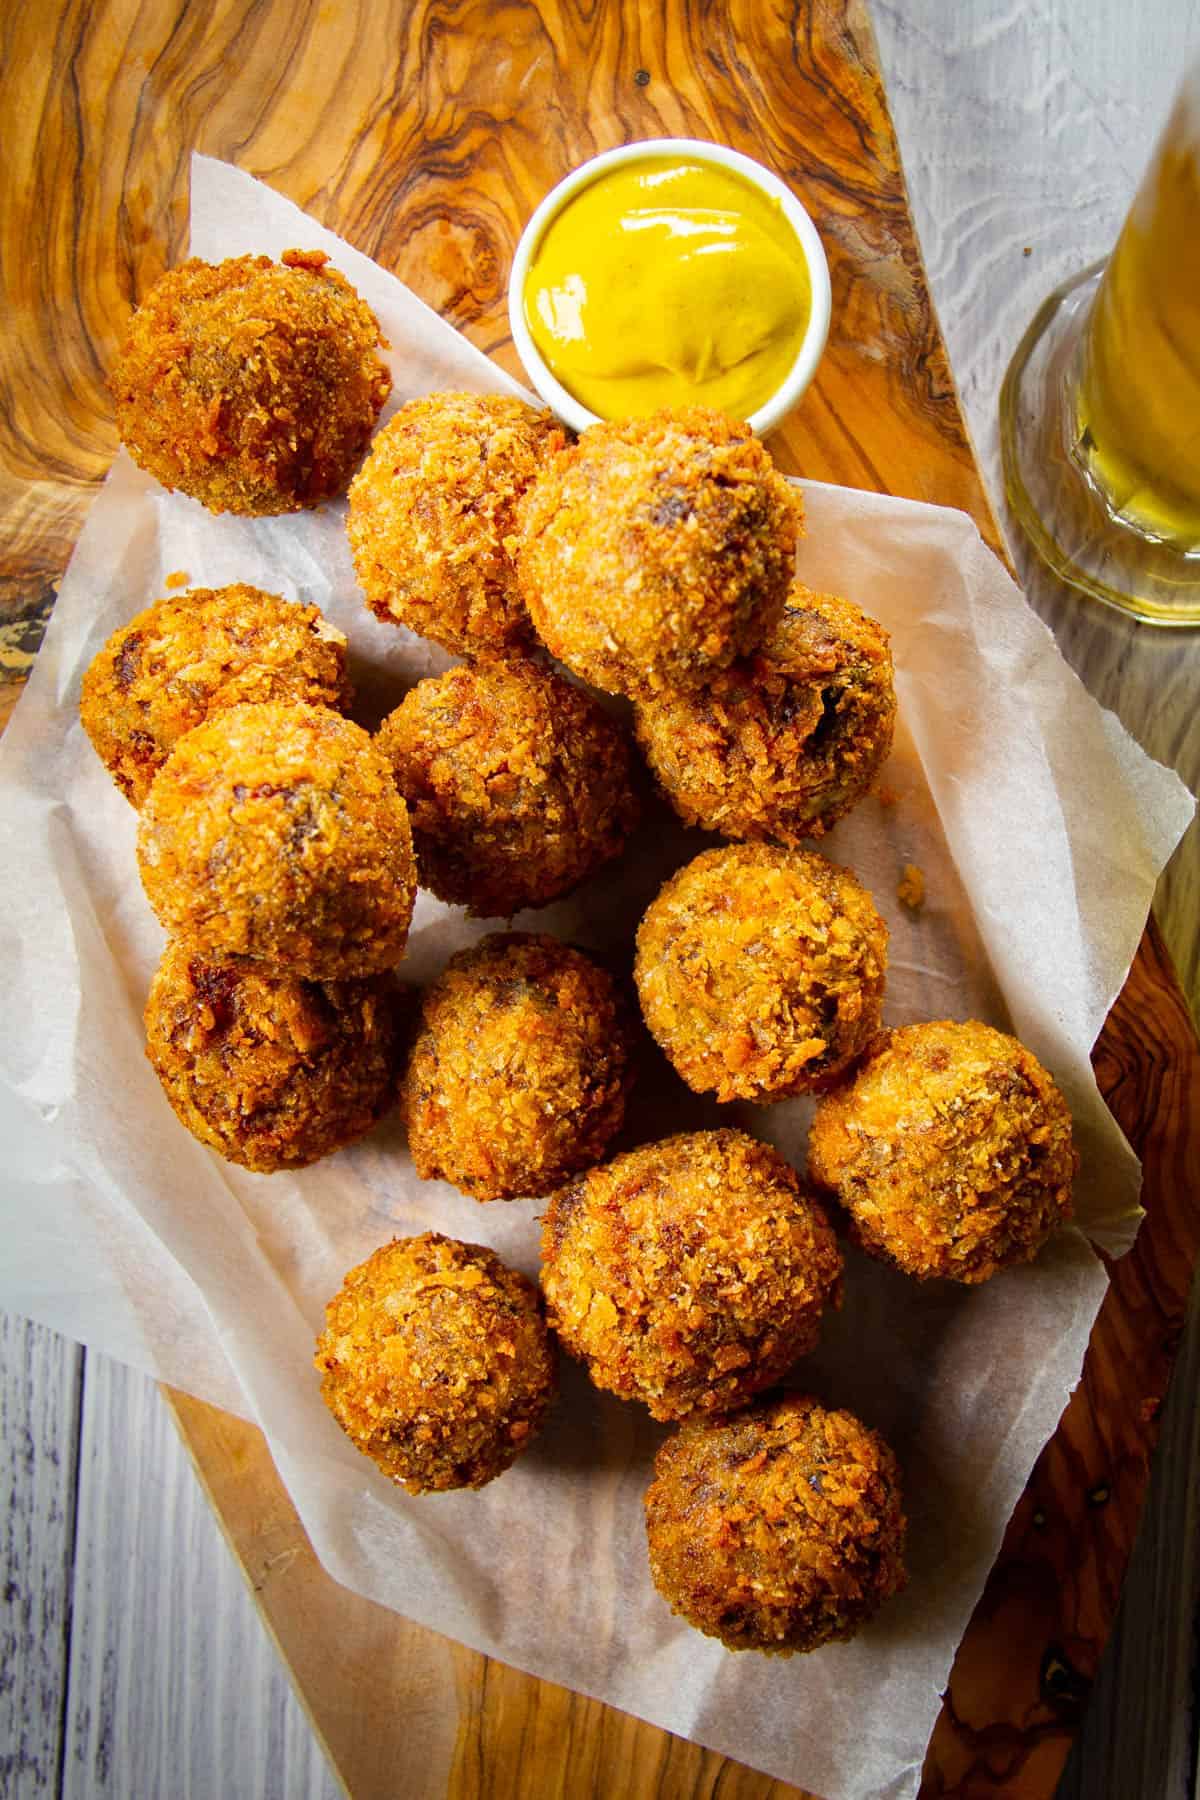 Bitterballen on a board with a mustard on the side for dipping.